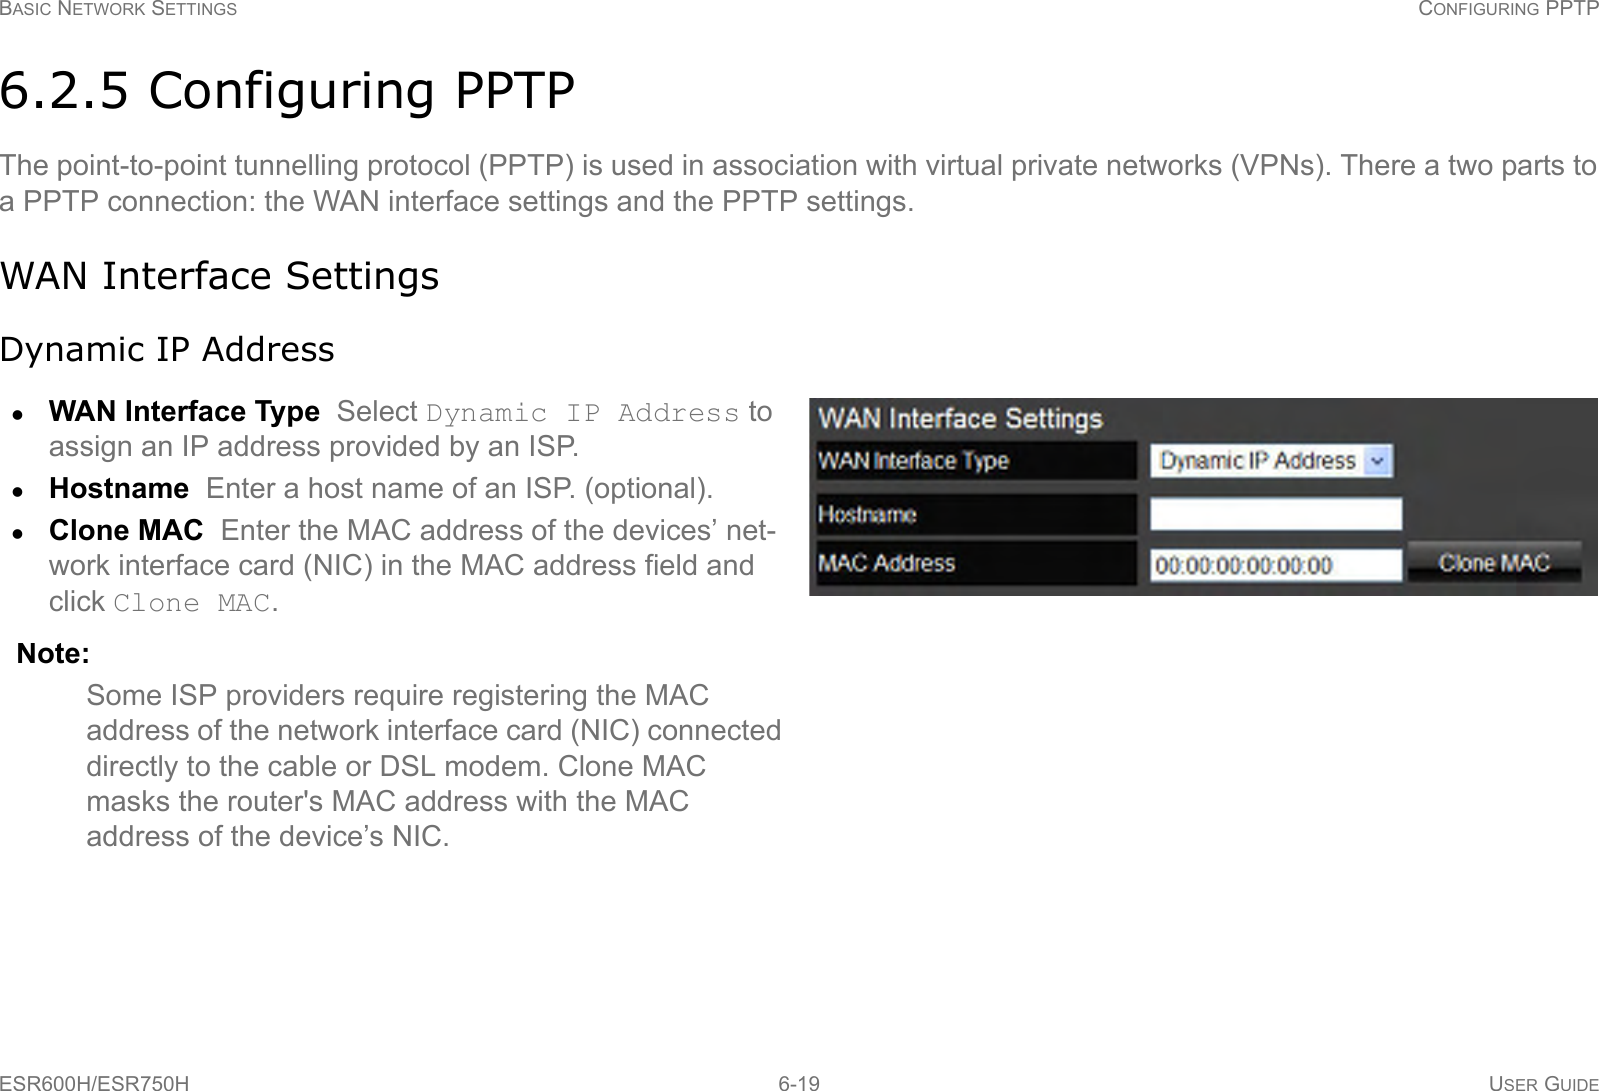 BASIC NETWORK SETTINGS CONFIGURING PPTPESR600H/ESR750H 6-19 USER GUIDE6.2.5 Configuring PPTPThe point-to-point tunnelling protocol (PPTP) is used in association with virtual private networks (VPNs). There a two parts to a PPTP connection: the WAN interface settings and the PPTP settings.WAN Interface SettingsDynamic IP AddressWAN Interface Type  Select Dynamic IP Address to assign an IP address provided by an ISP.Hostname  Enter a host name of an ISP. (optional).Clone MAC  Enter the MAC address of the devices’ net-work interface card (NIC) in the MAC address field and click Clone MAC. Note:Some ISP providers require registering the MAC address of the network interface card (NIC) connected directly to the cable or DSL modem. Clone MAC masks the router&apos;s MAC address with the MAC address of the device’s NIC.